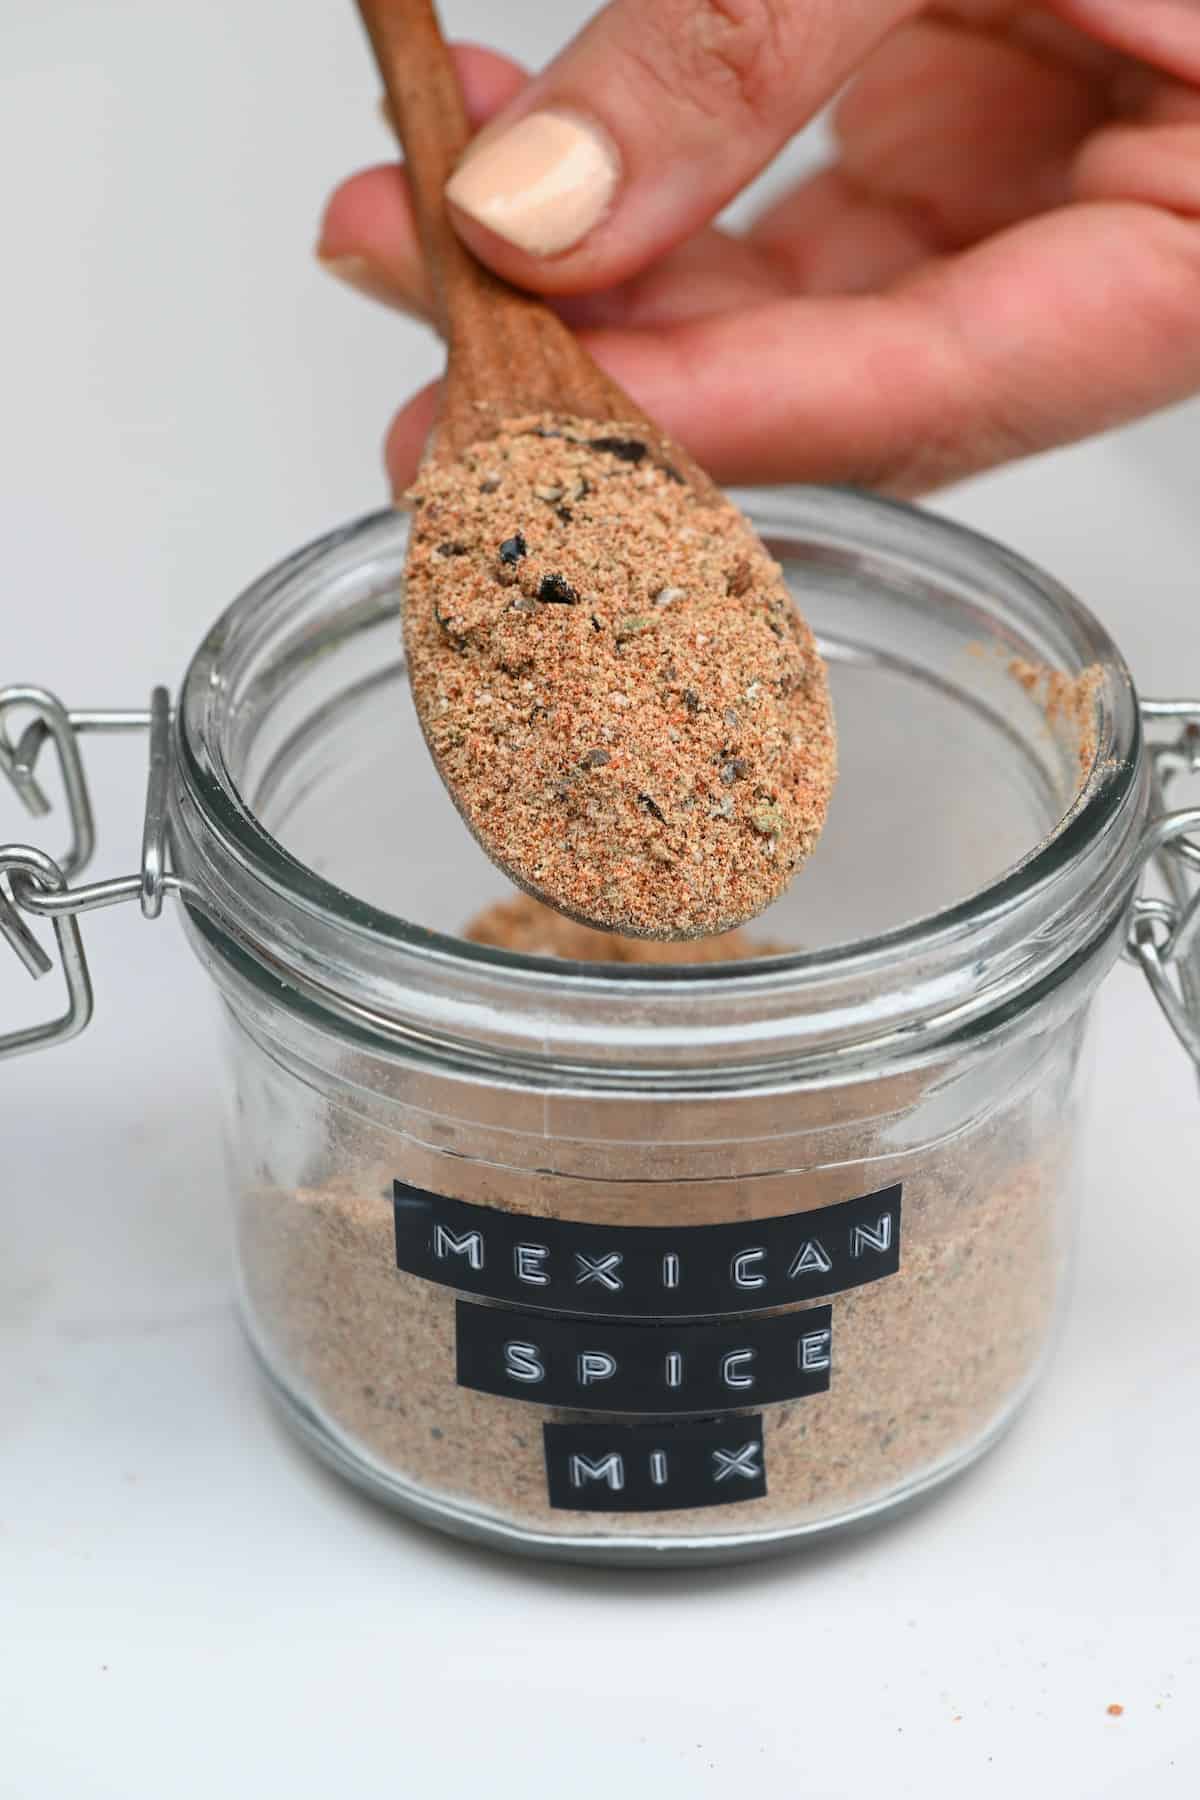 A spoonful of Mexican spice